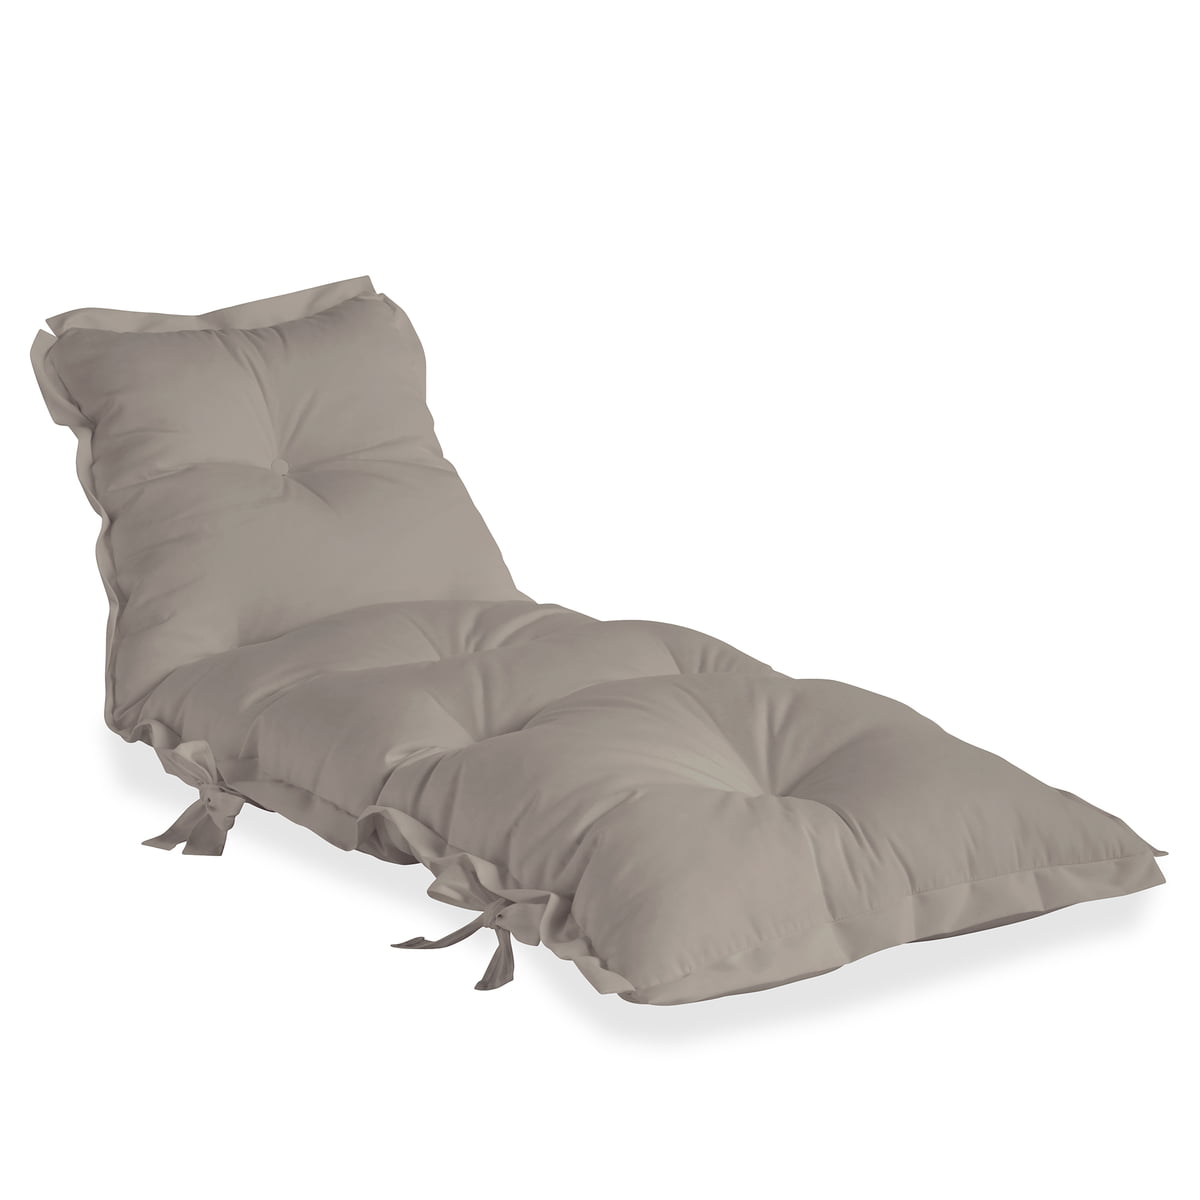 | out and Karup sleep Connox Design - Sit